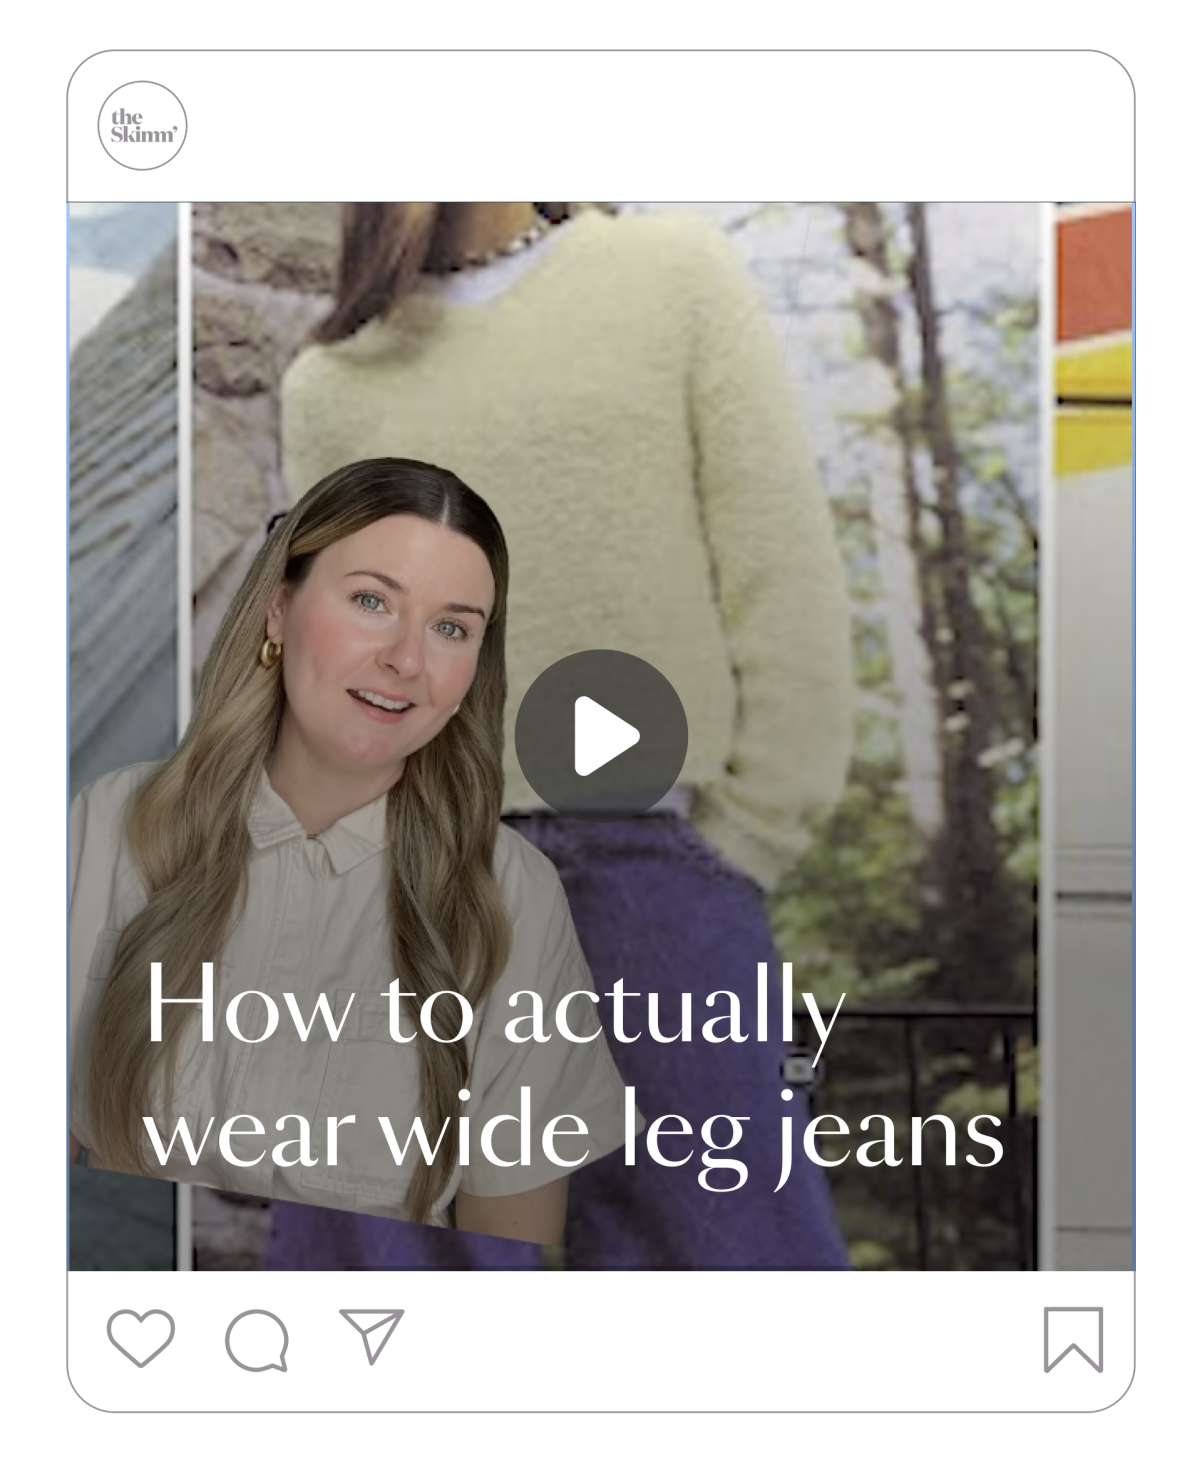 how to actually wear wide leg jeans video